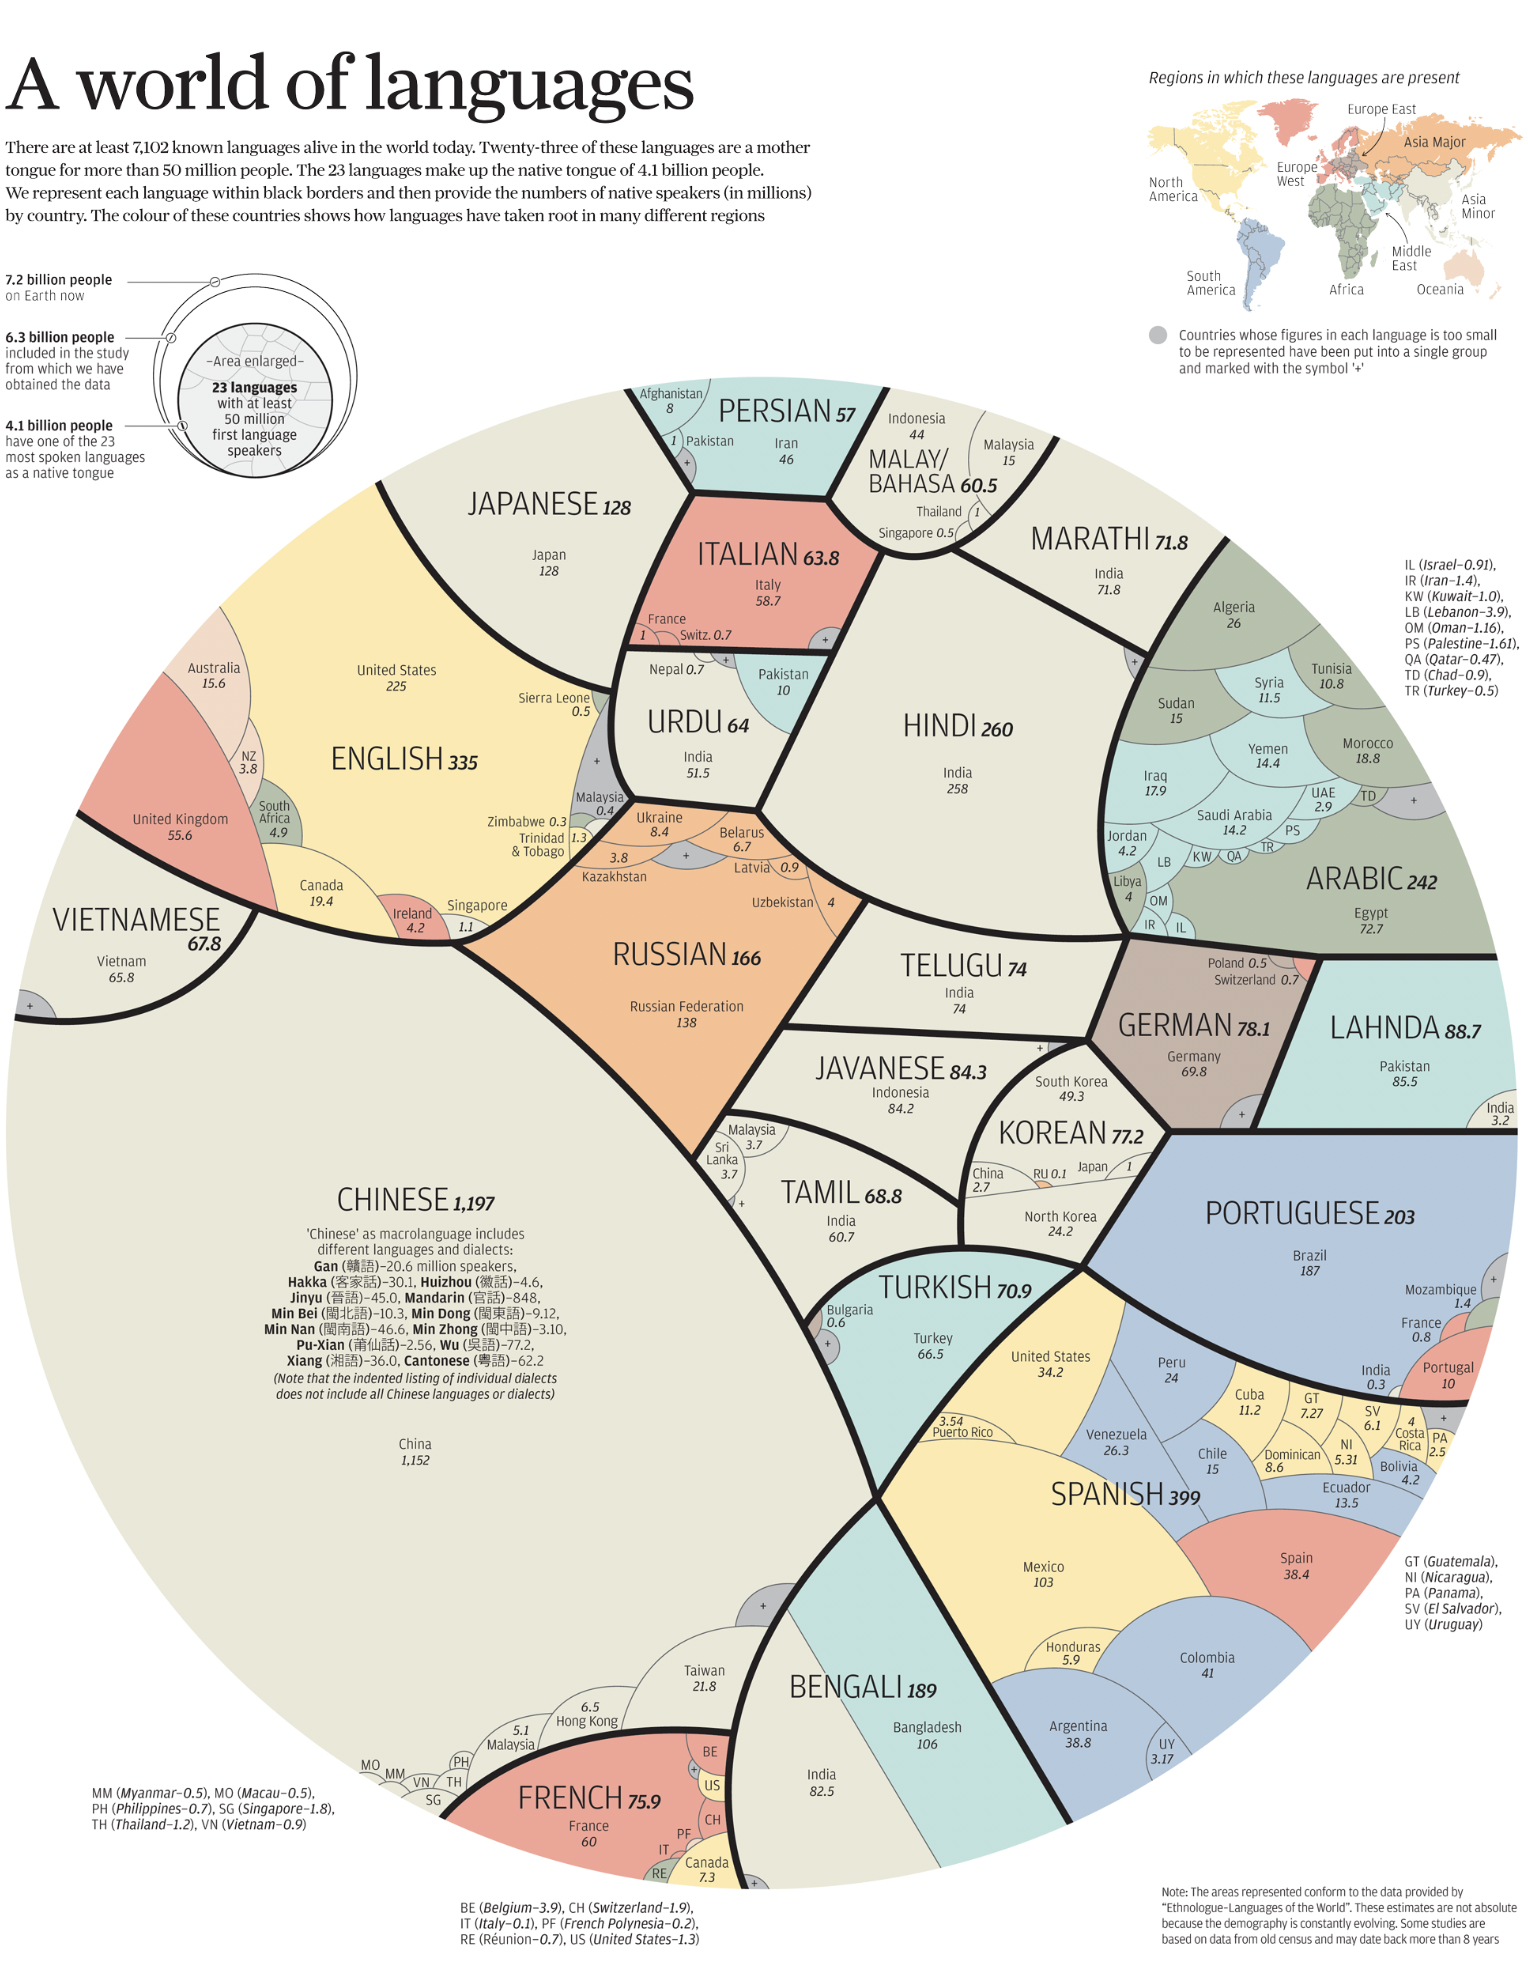 A Voronoi treemap showing languages and the number of people that speak them